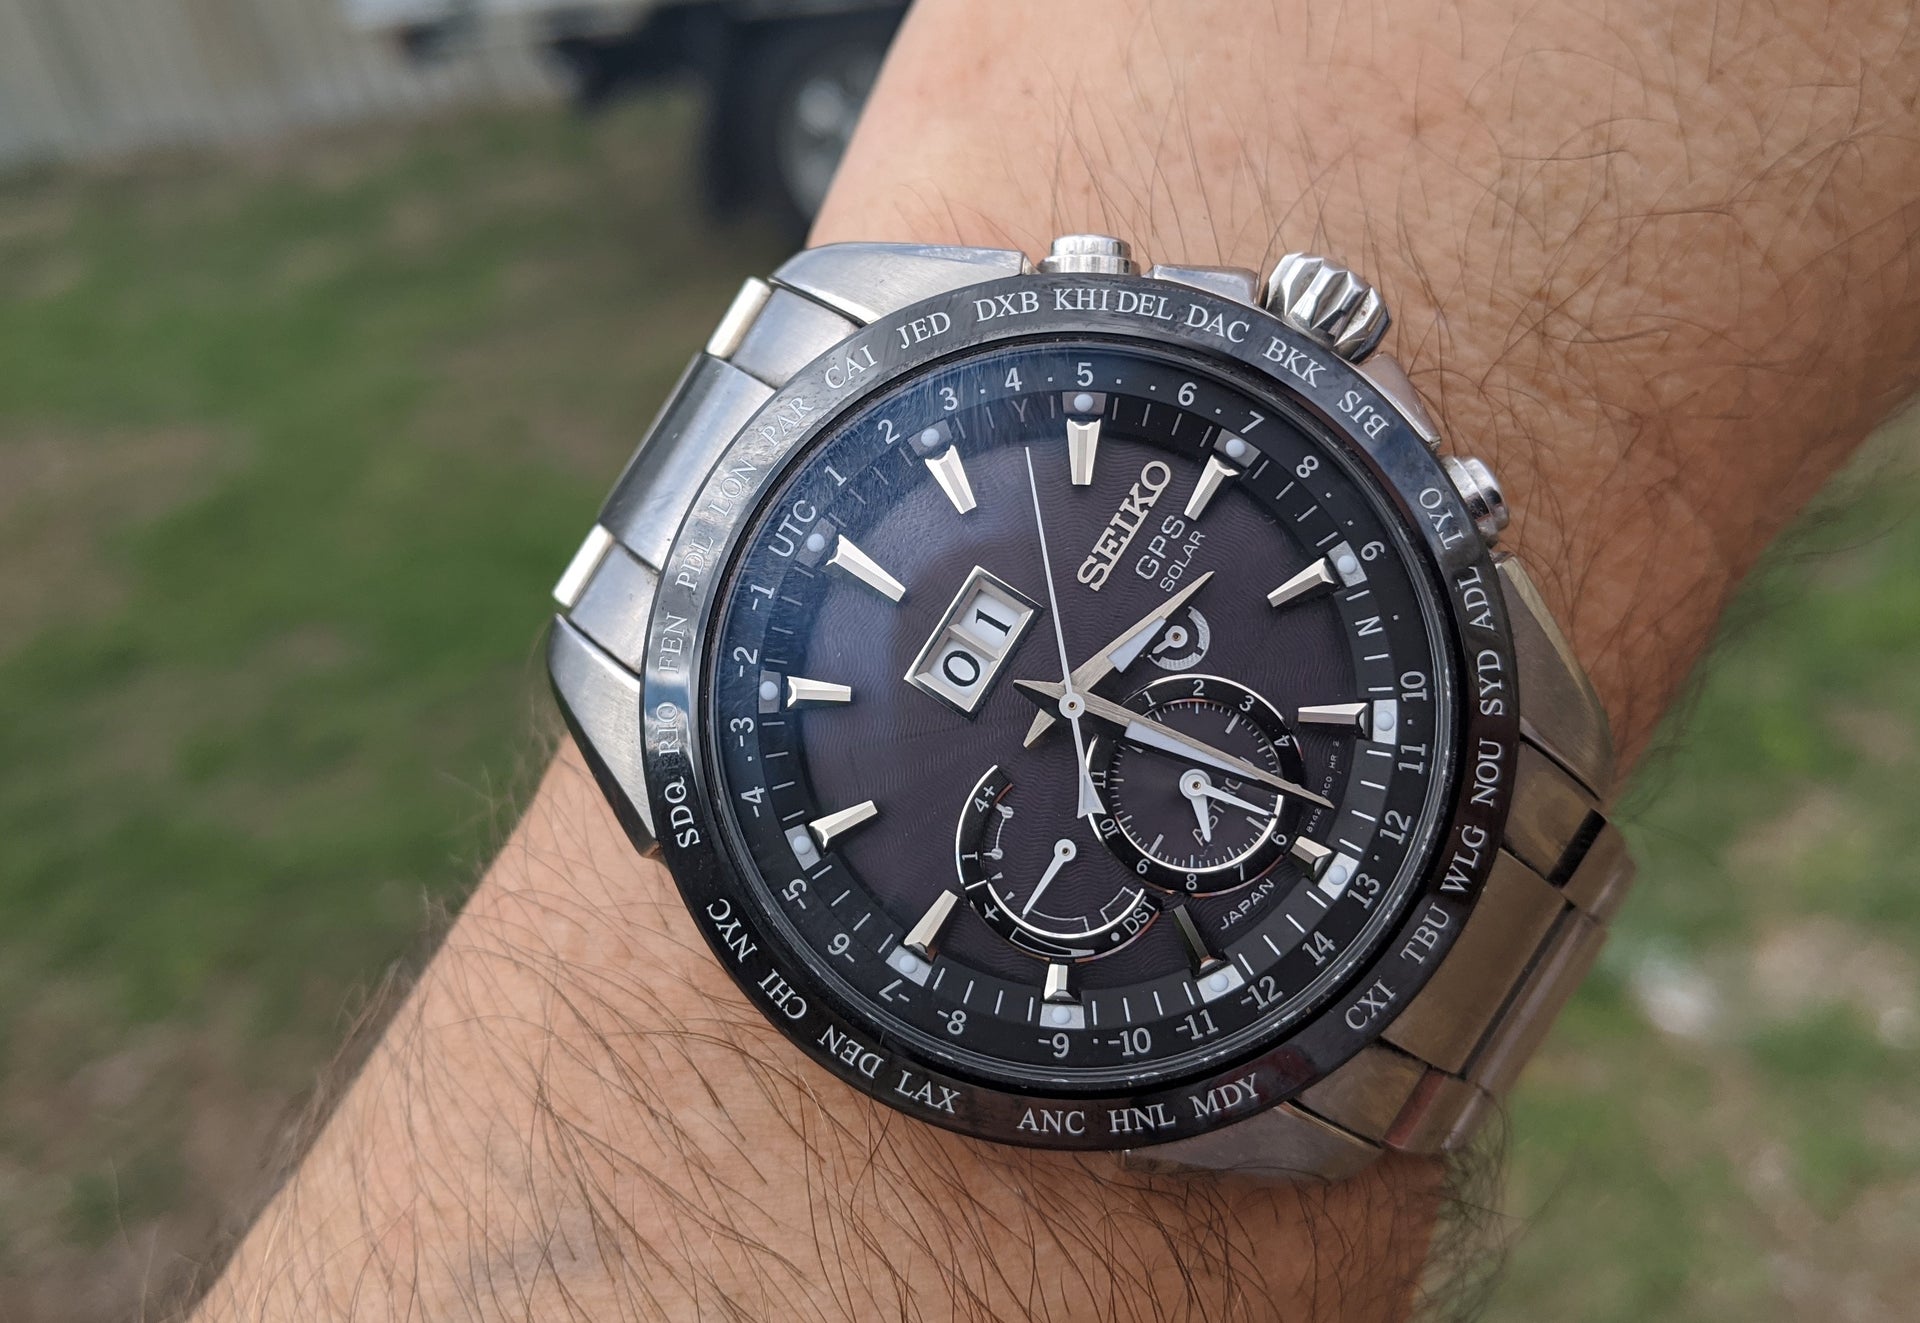 Seiko, Citizen, made in China? | Page 3 | WatchUSeek Watch Forums